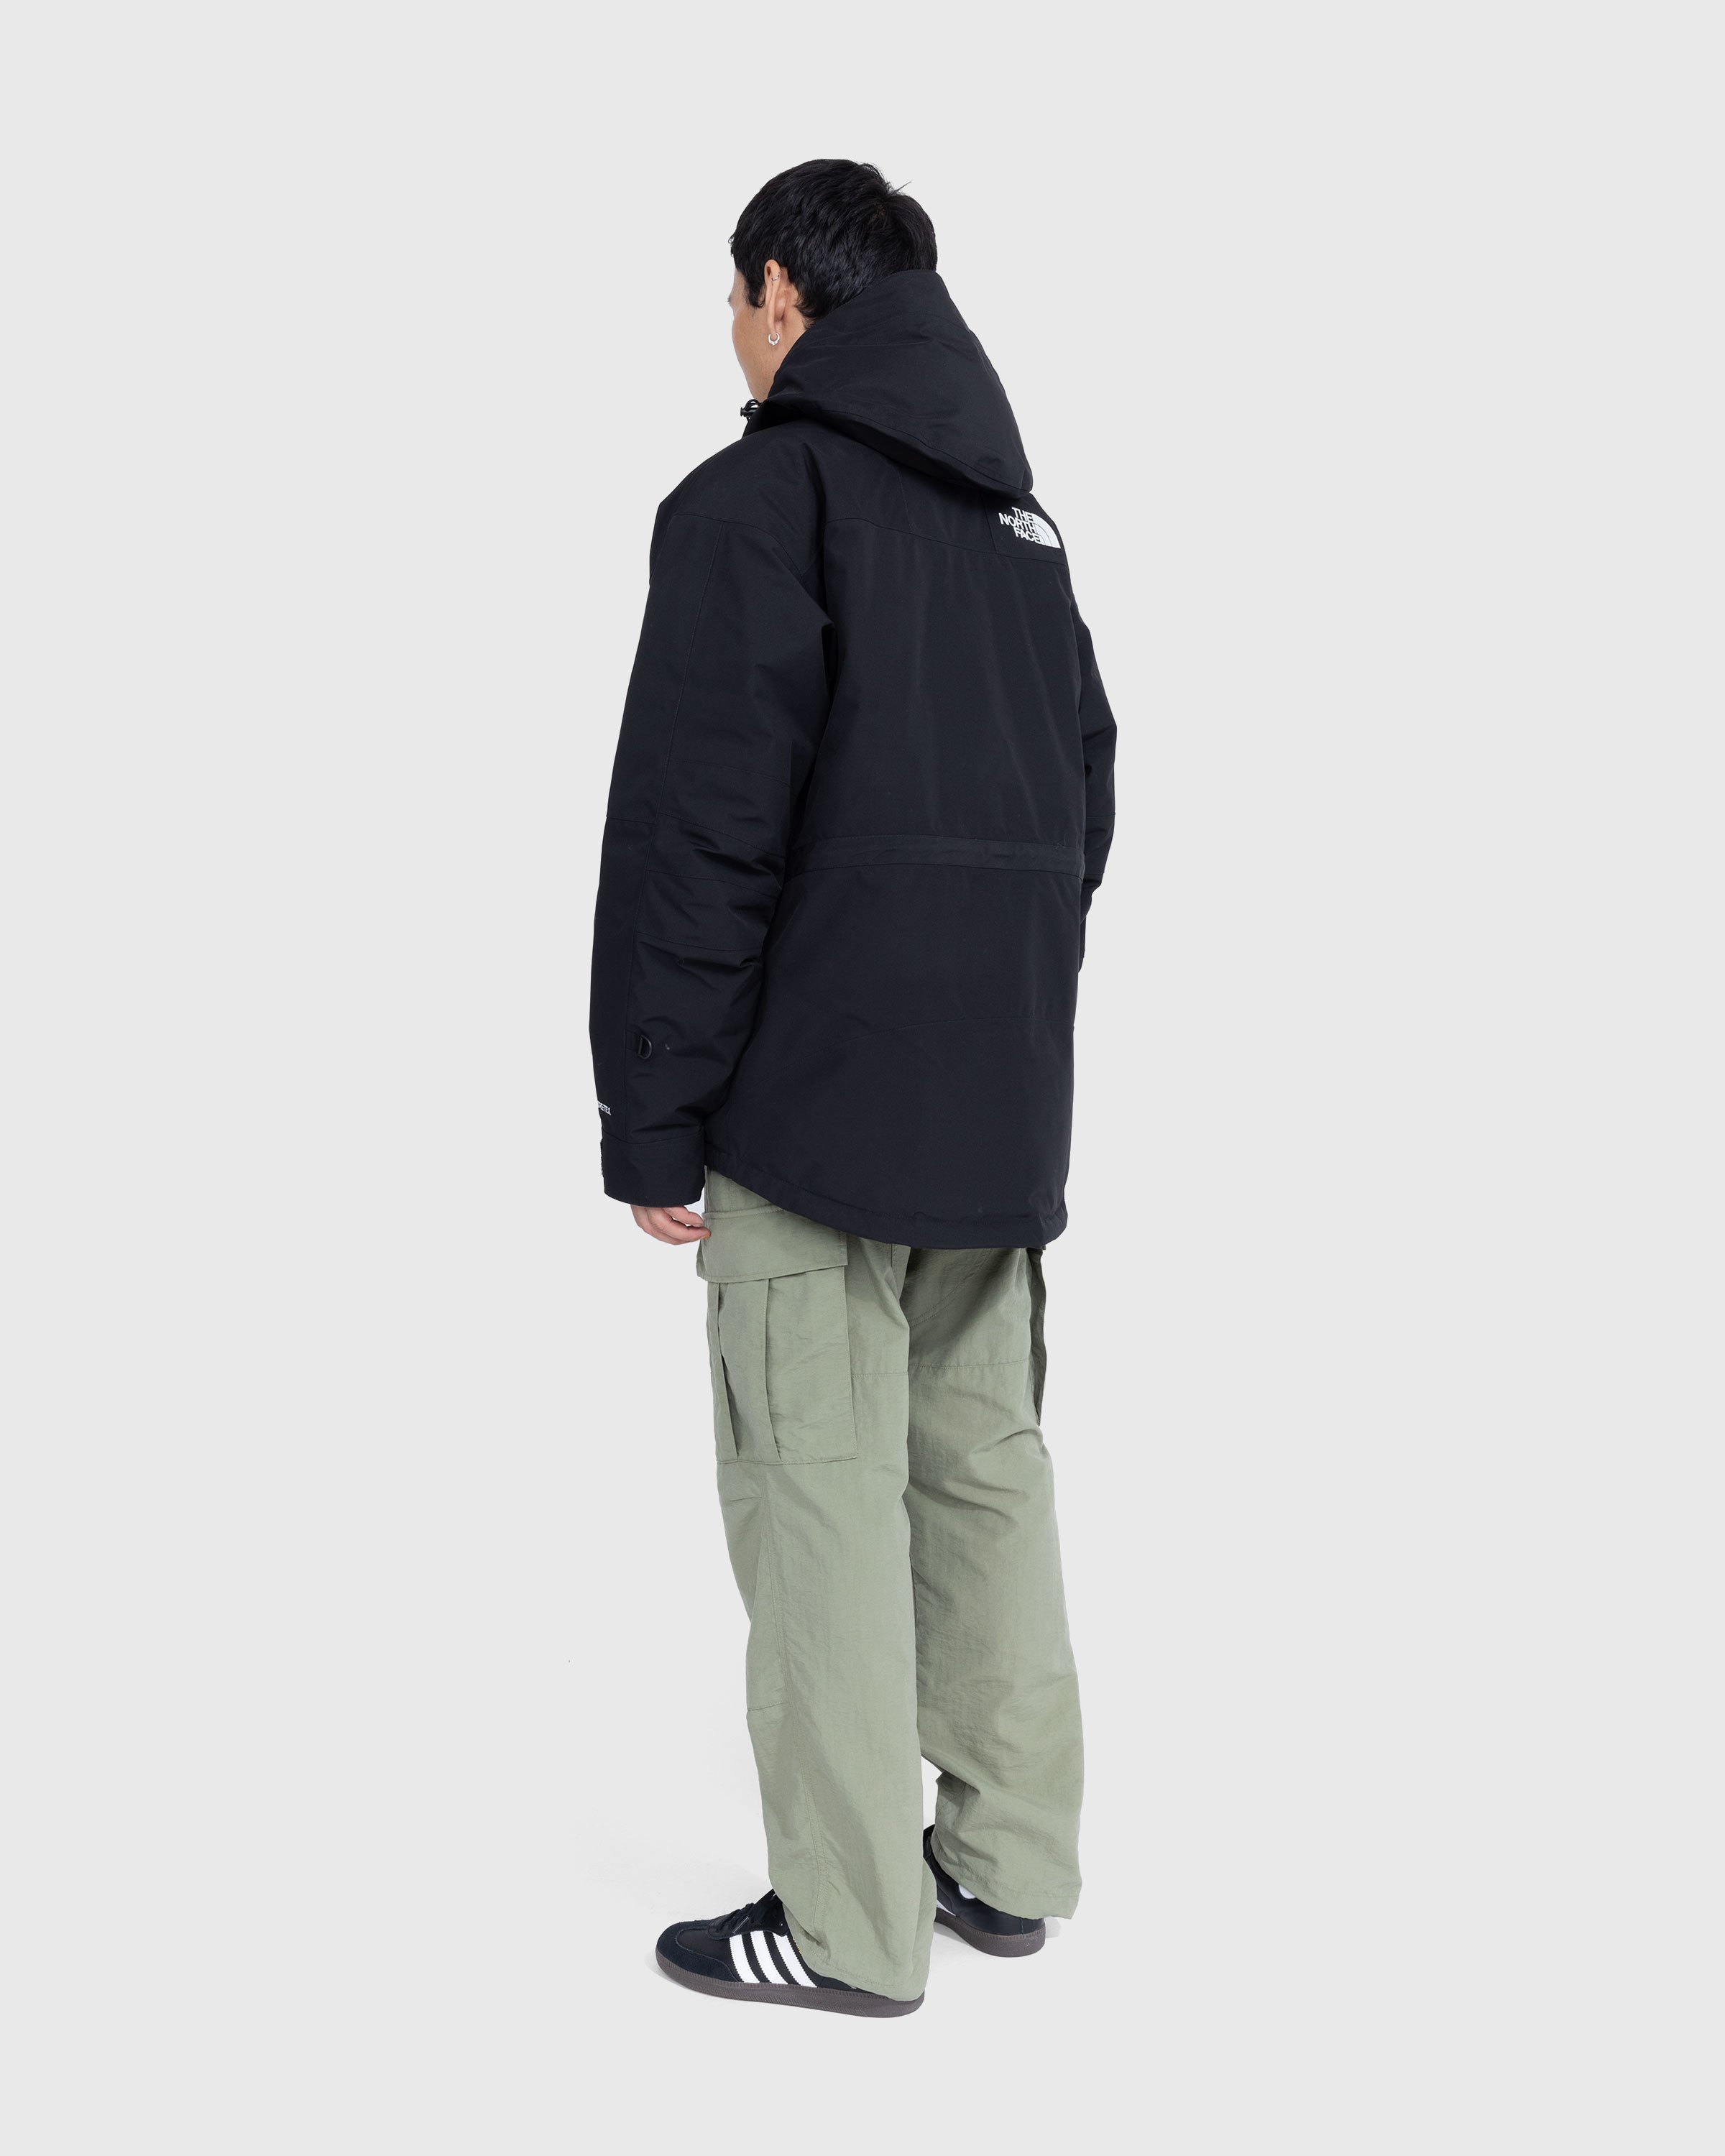 The North Face - GORE-TEX Mountain Guide Insulated Jacket Black - Clothing - Black - Image 3